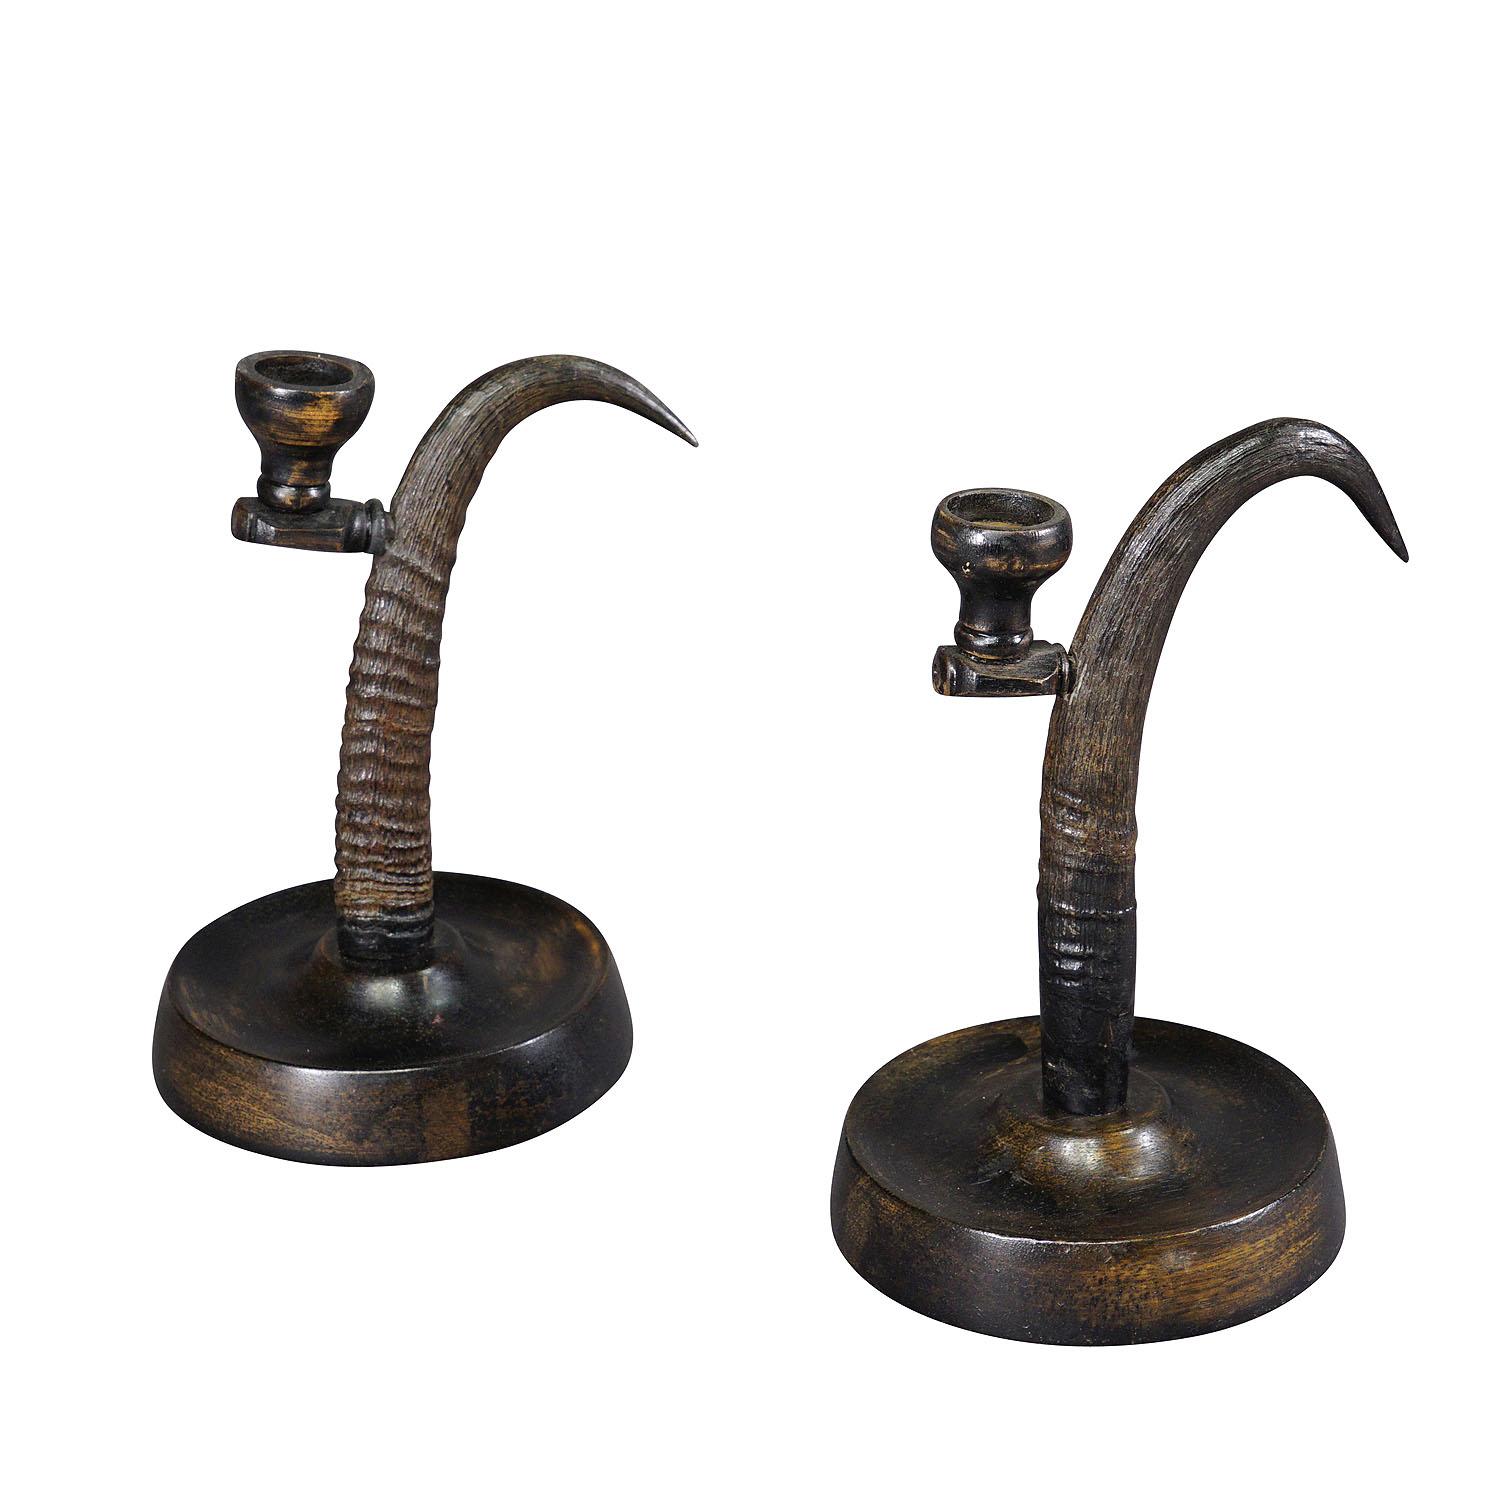 A Pair Lovely Antique Candle Holders with Chamois Horns

A lovely pair of rustic candle holders, made of horns from the chamois. The spout and base are made of turned and ebonized wood. Executed in Germany ca. 1900. They are a wonderful addition to